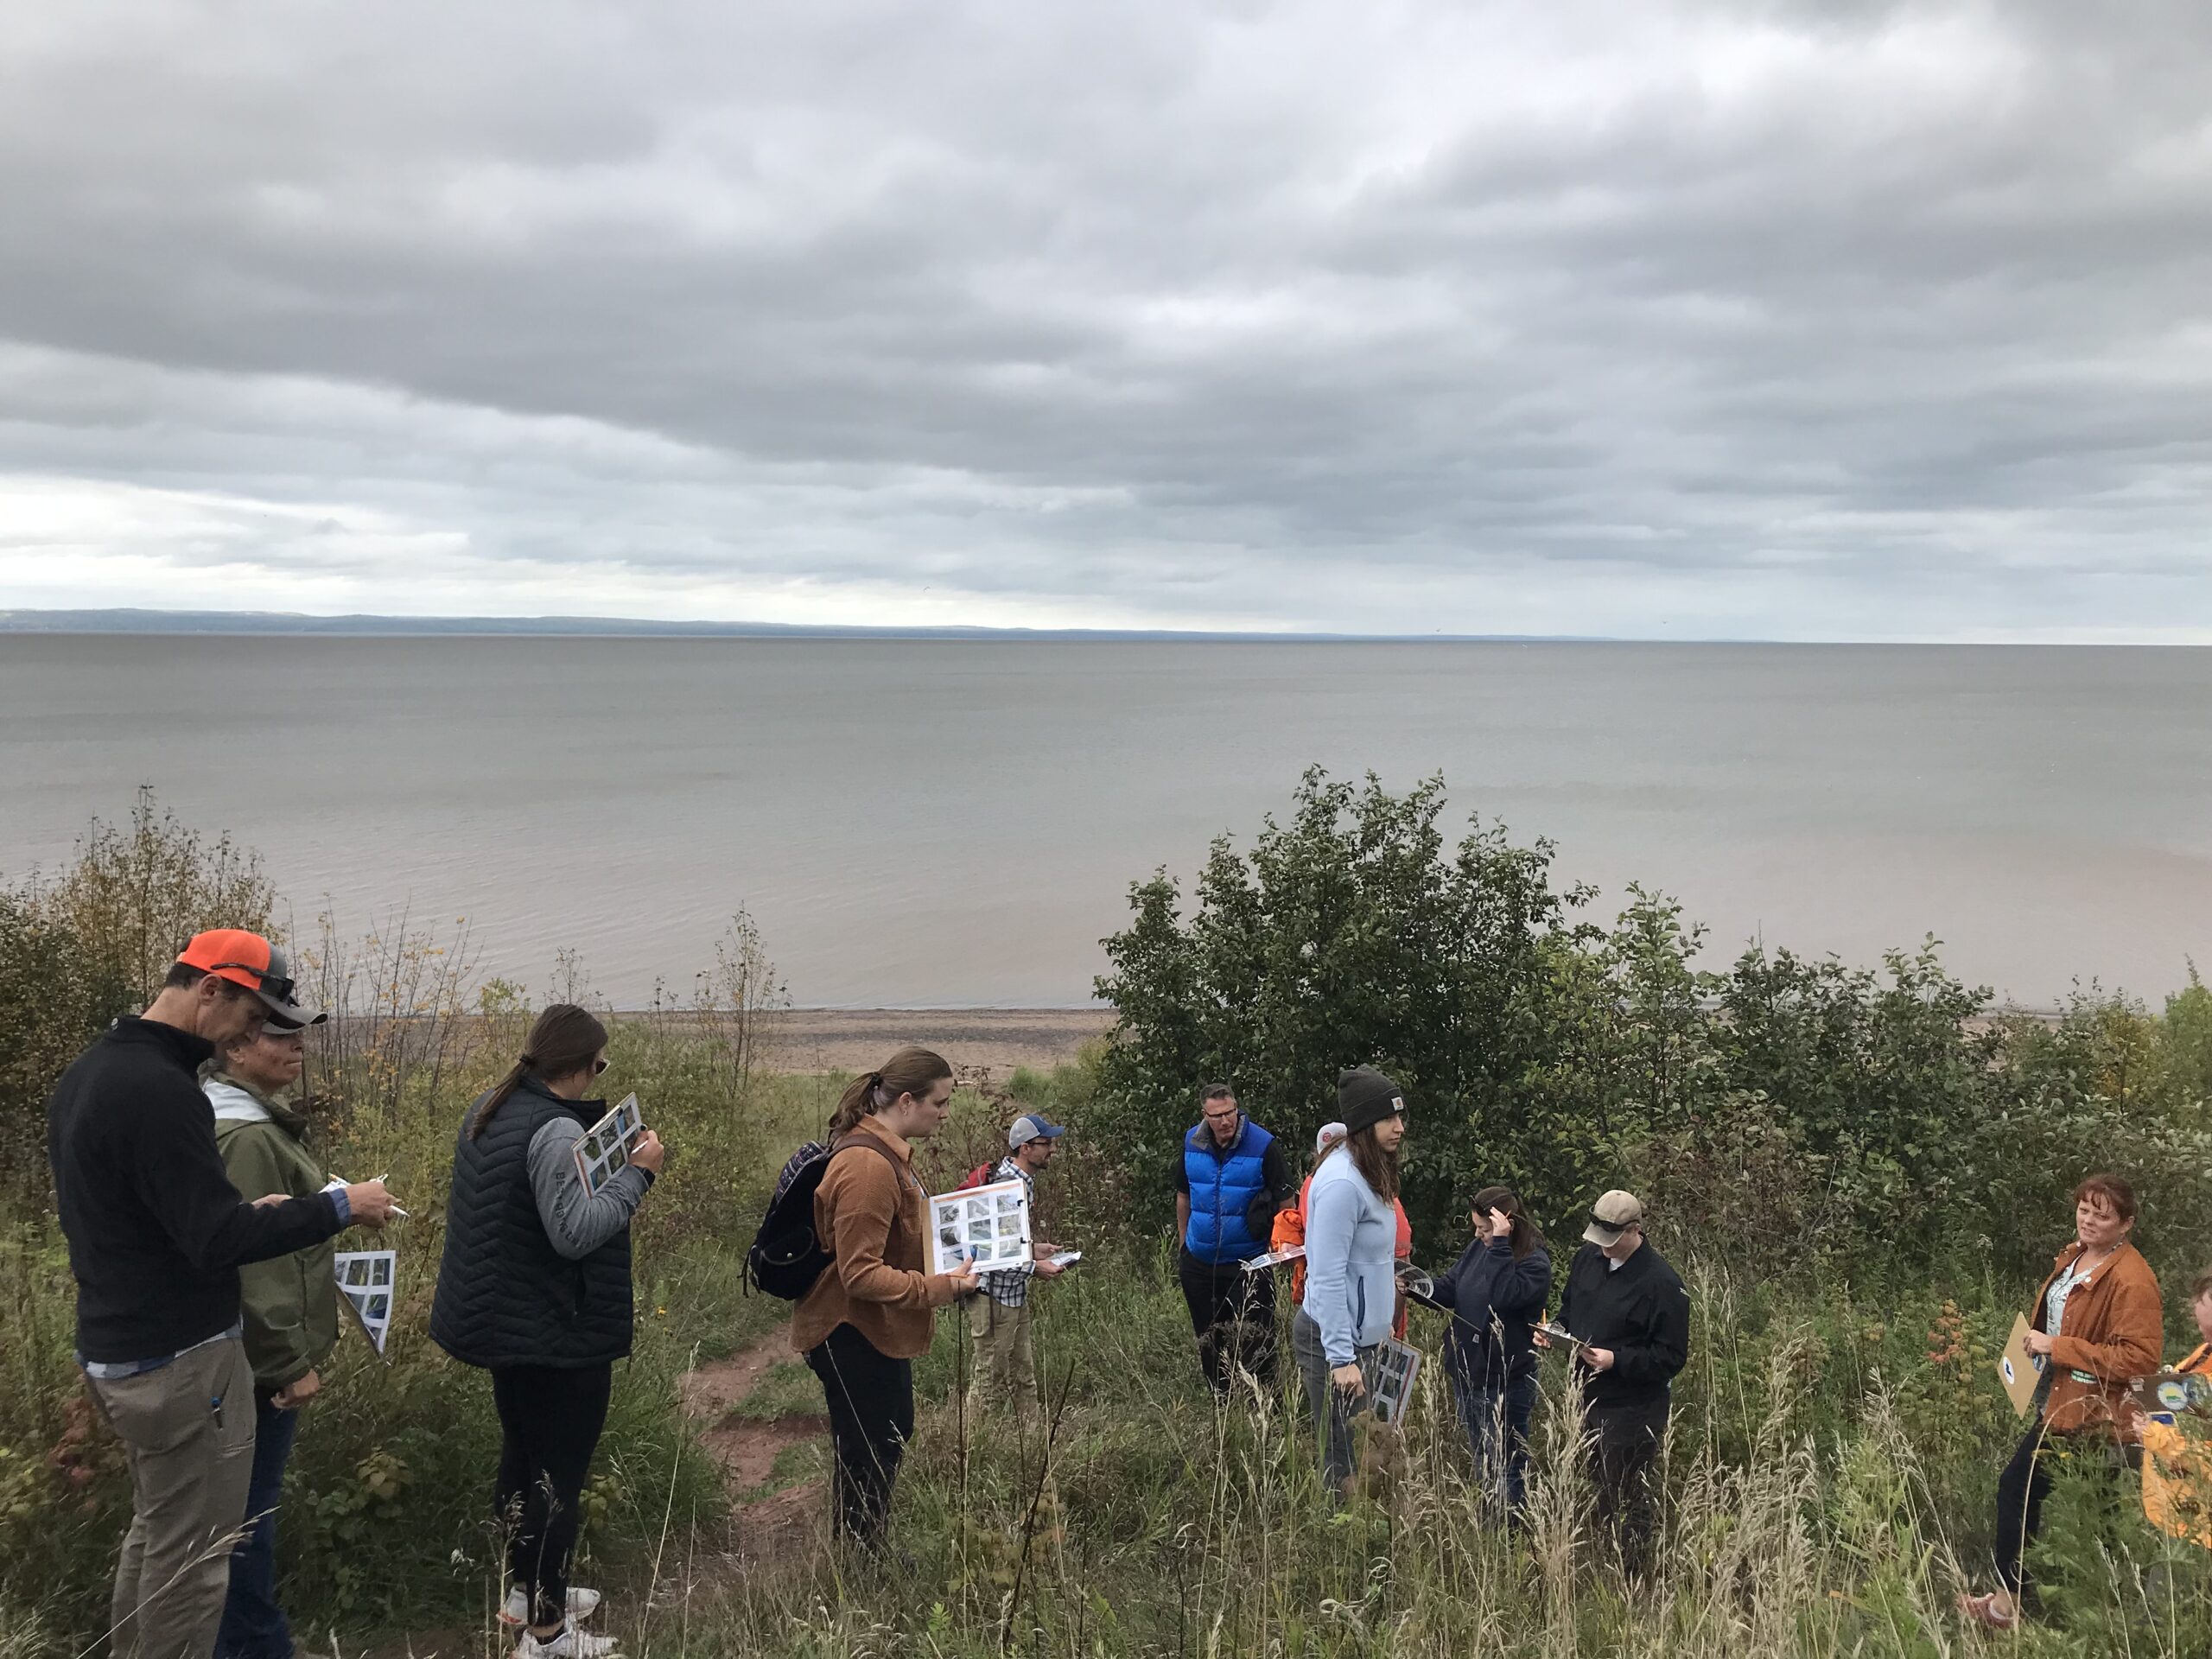 A group of people in jackets and vests maneuver down a bluff along Lake Superior with clipboards in hand.